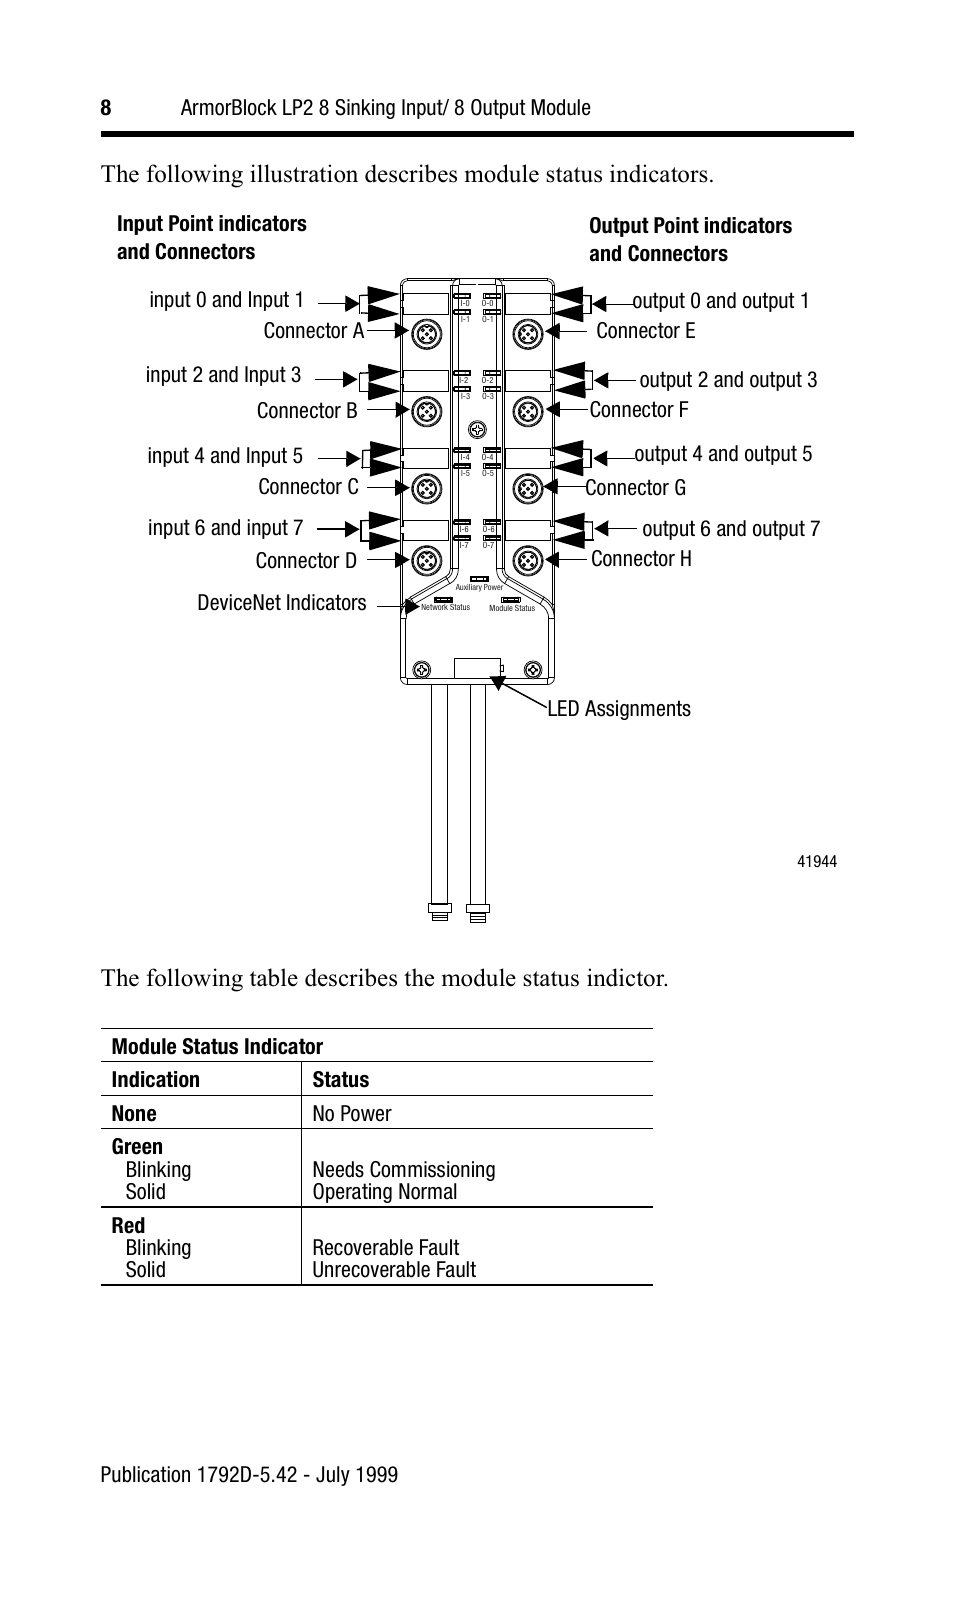 Input point indicators and connectors | Rockwell Automation 1792D-8BT8LP ArmorBlock LP2 8 Sinking Input/8 Output Modul User Manual | Page 8 / 12